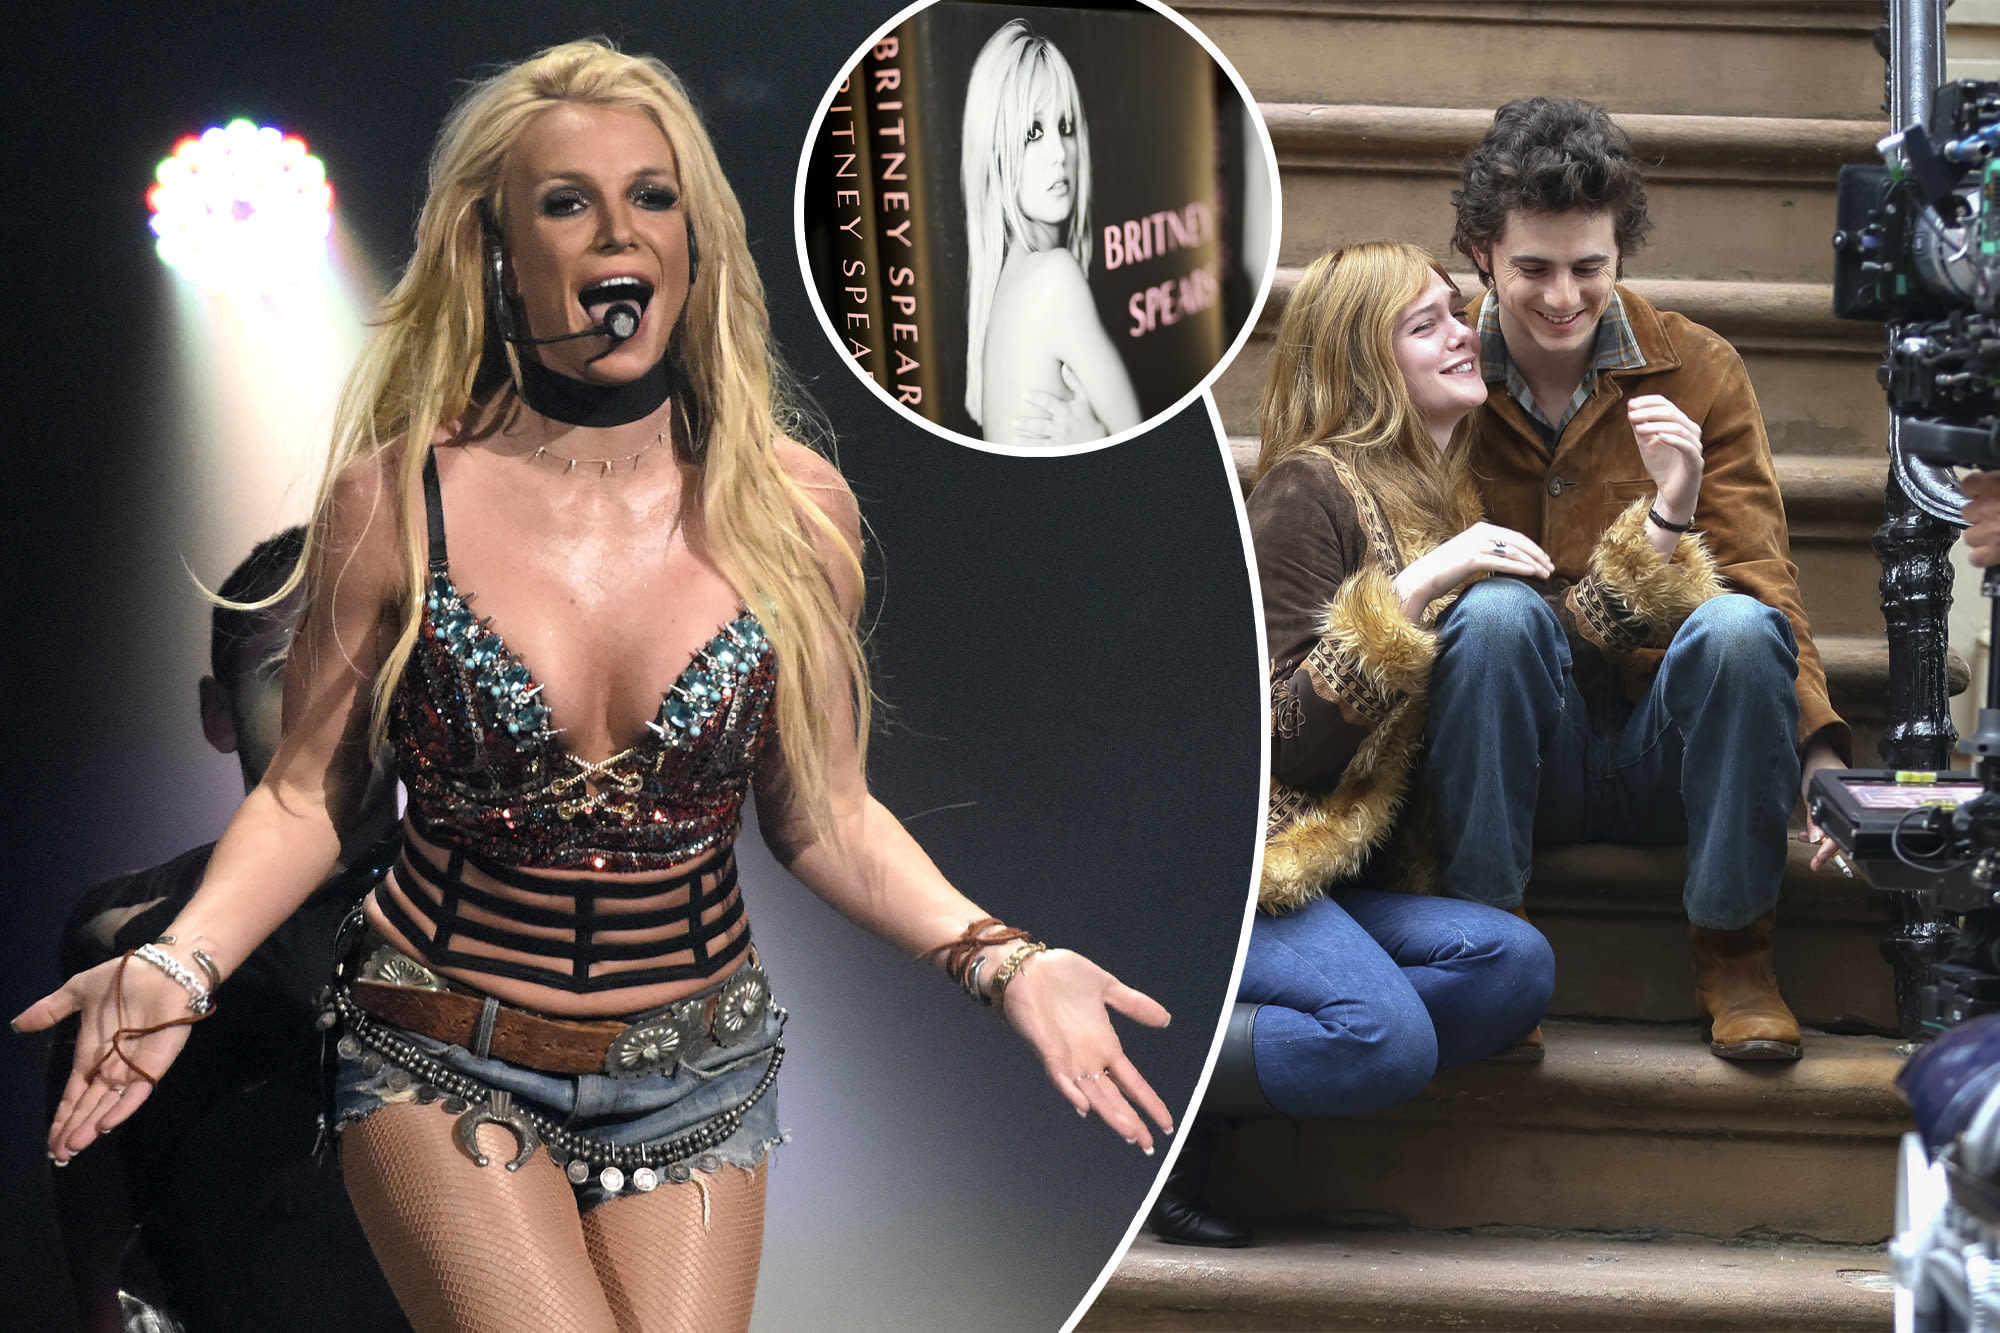 Britney, too? Audiences are sick and tired of formulaic musician biopics